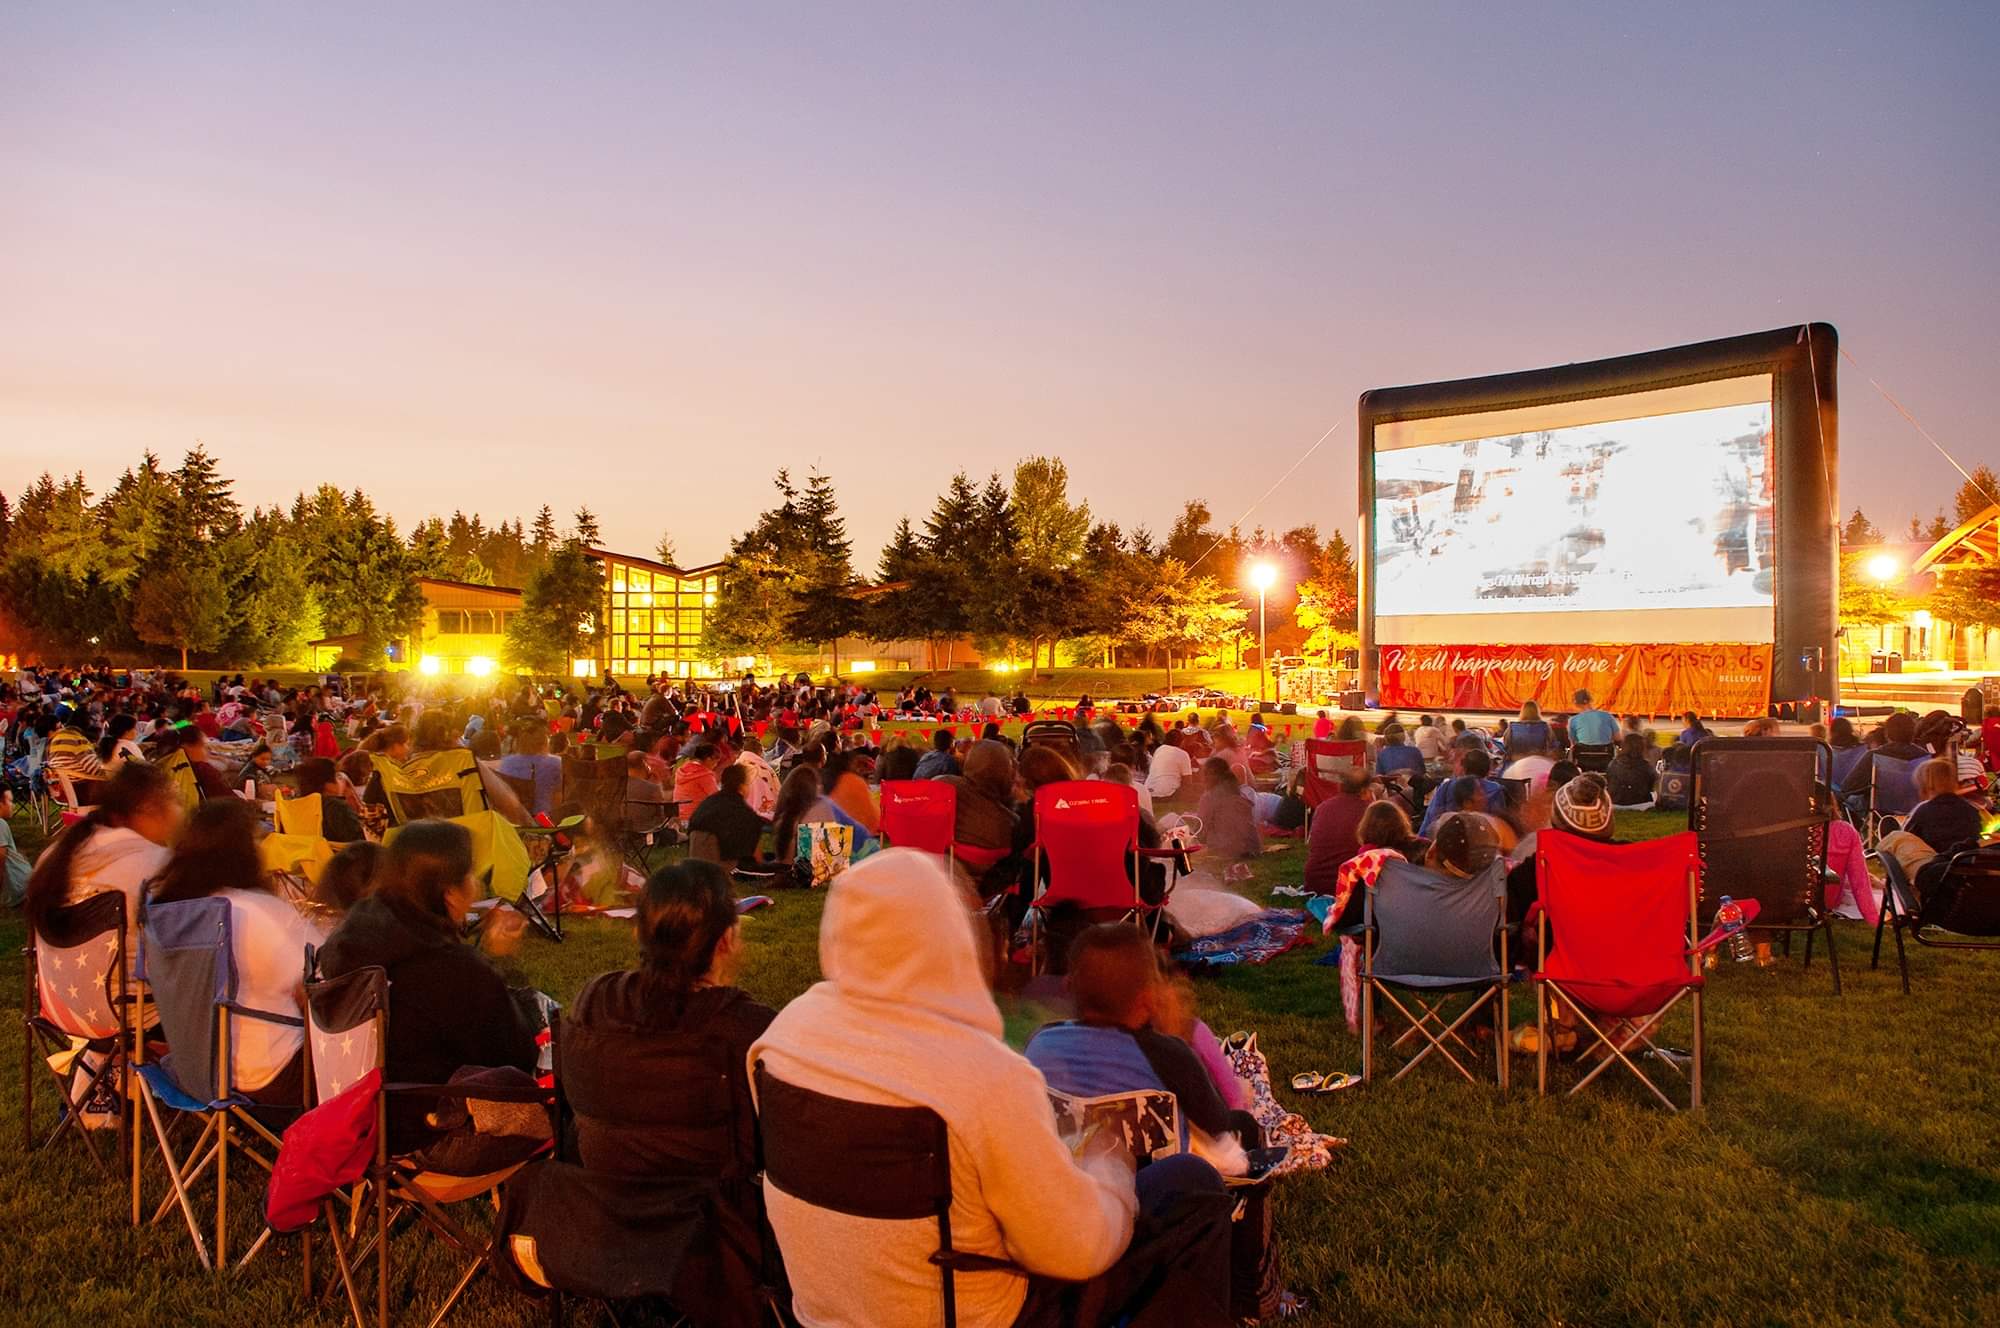 A view of people sitting on the lawn at Crossroads Park in Bellevue watching a movie outdoors on a big screen on a summer evening